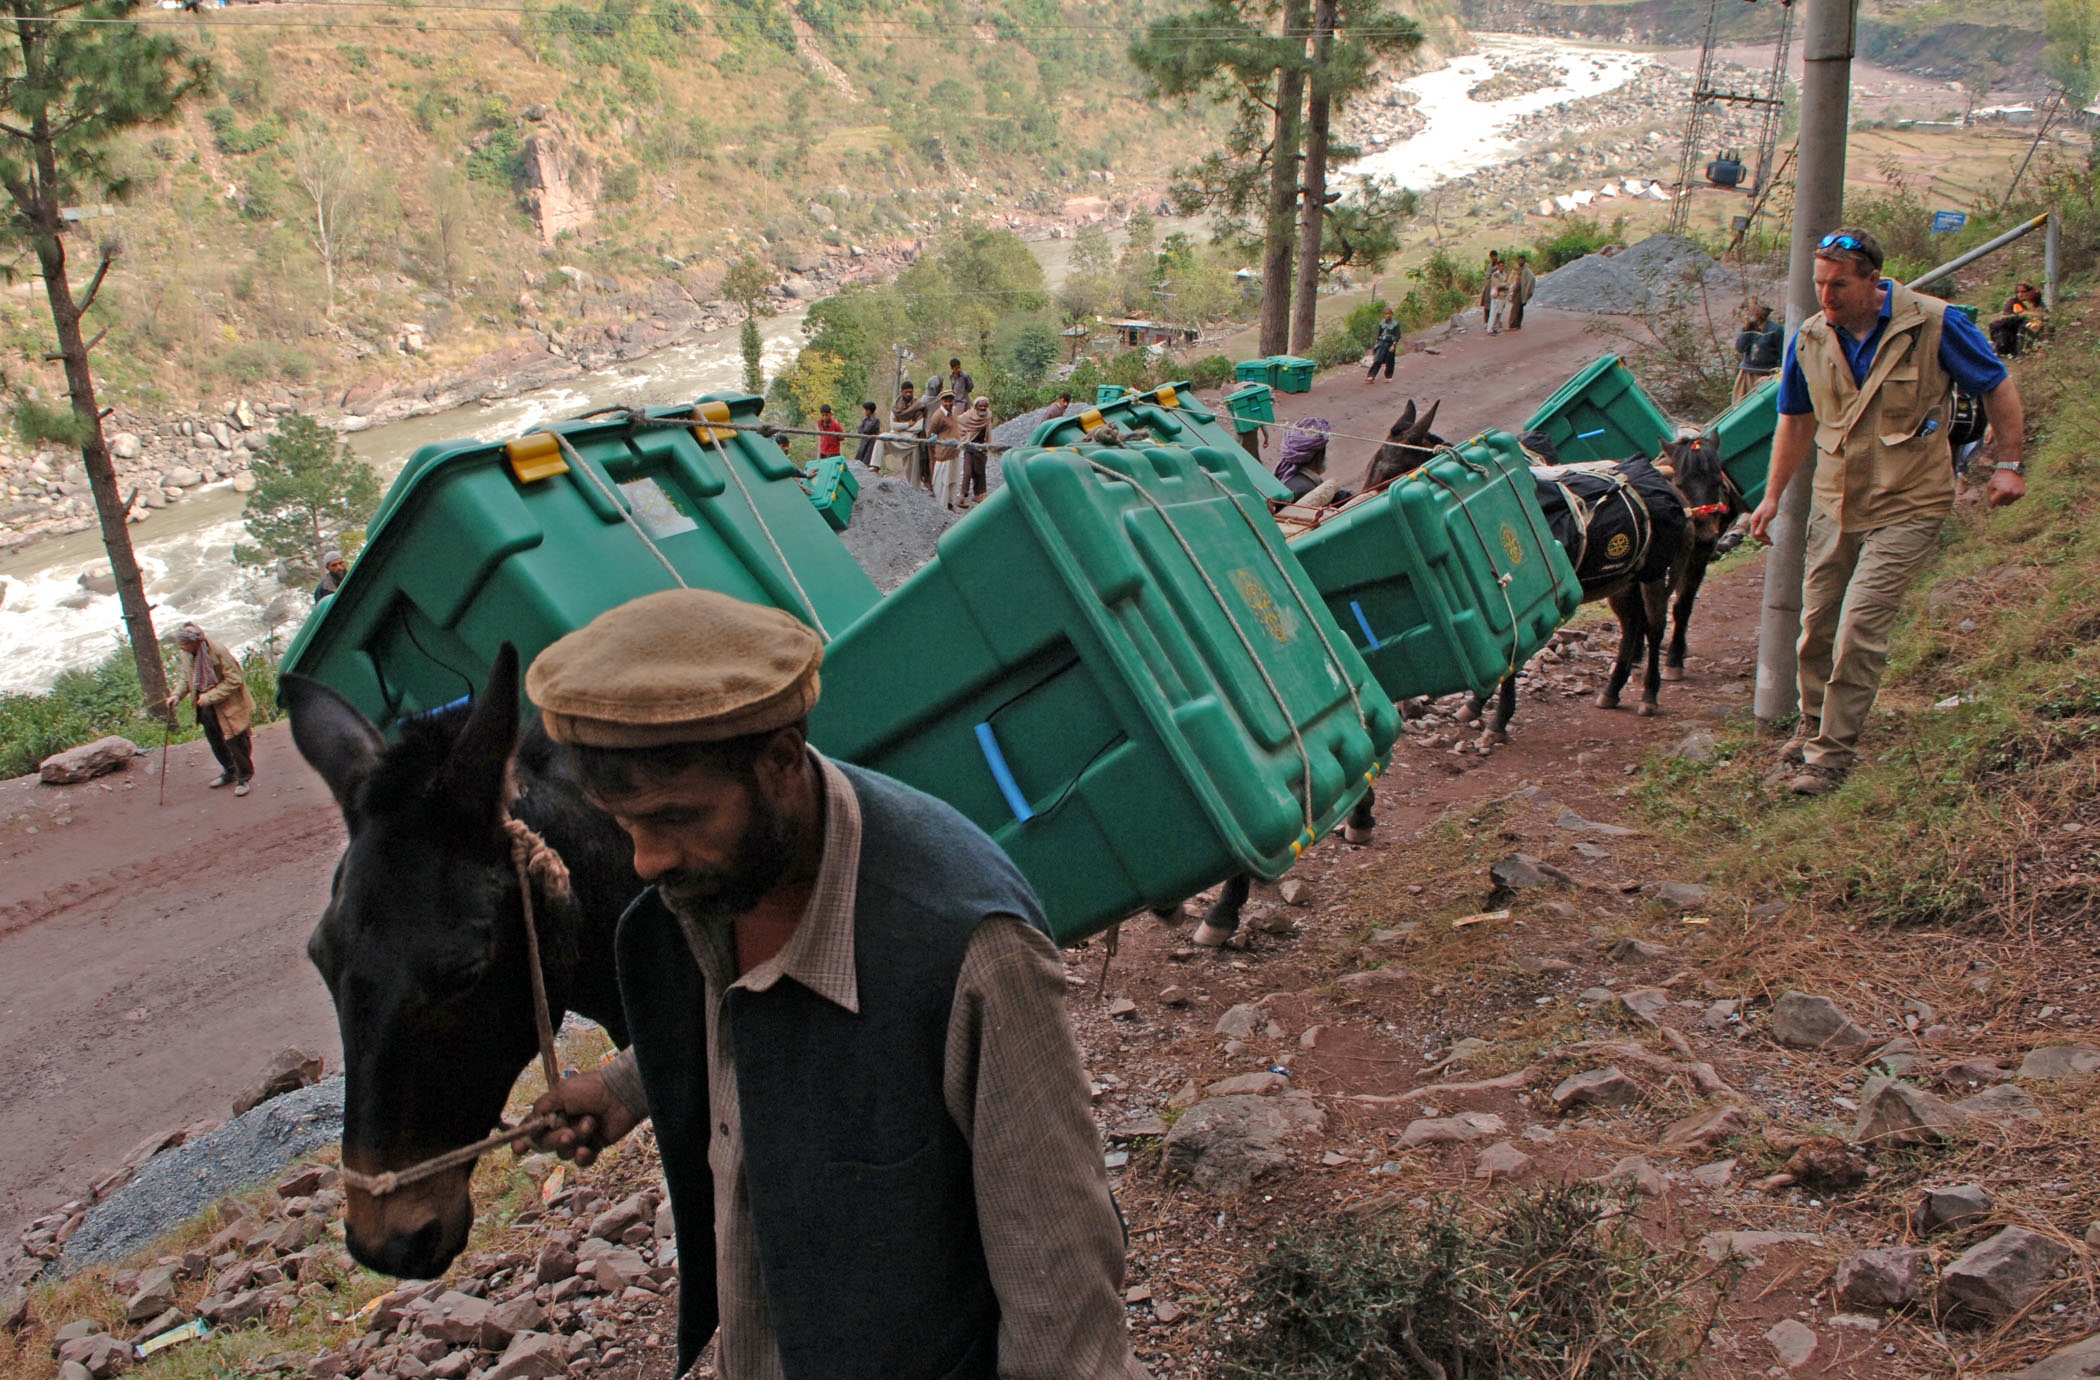 Mules carry shelter boxes up the mountain in Pakistan